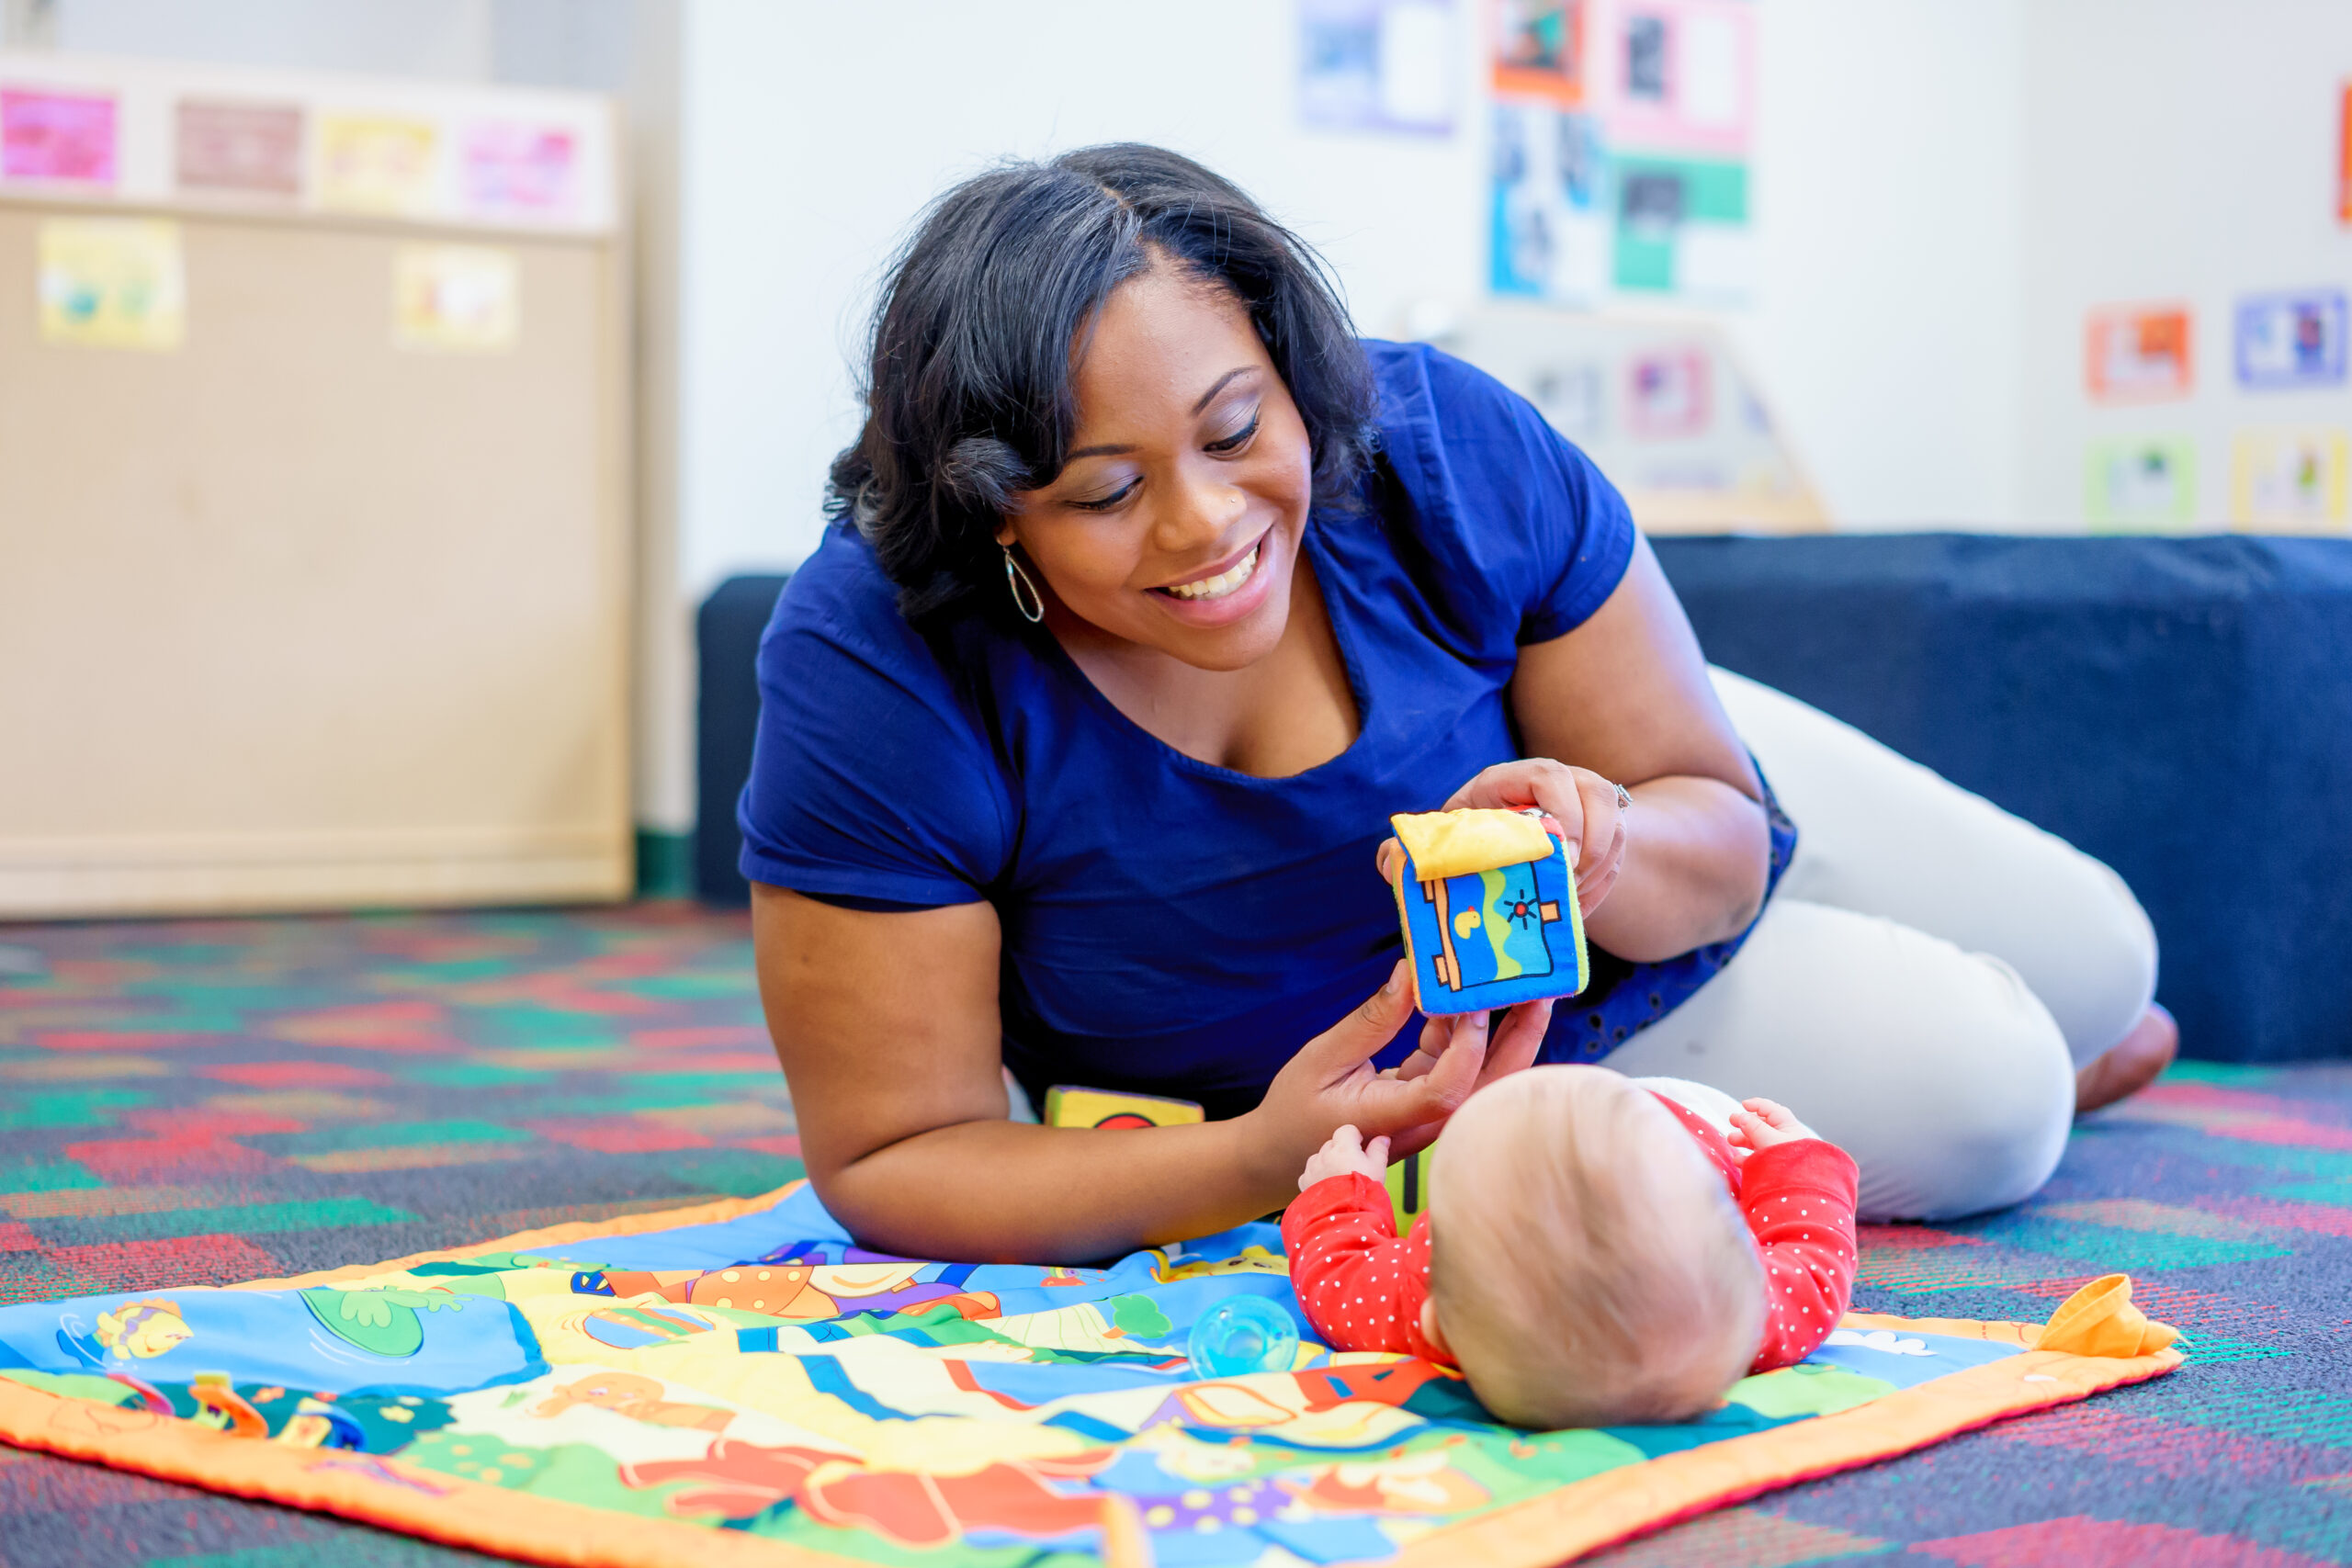 Teacher holding a soft block and playing with an infant on an activity mat